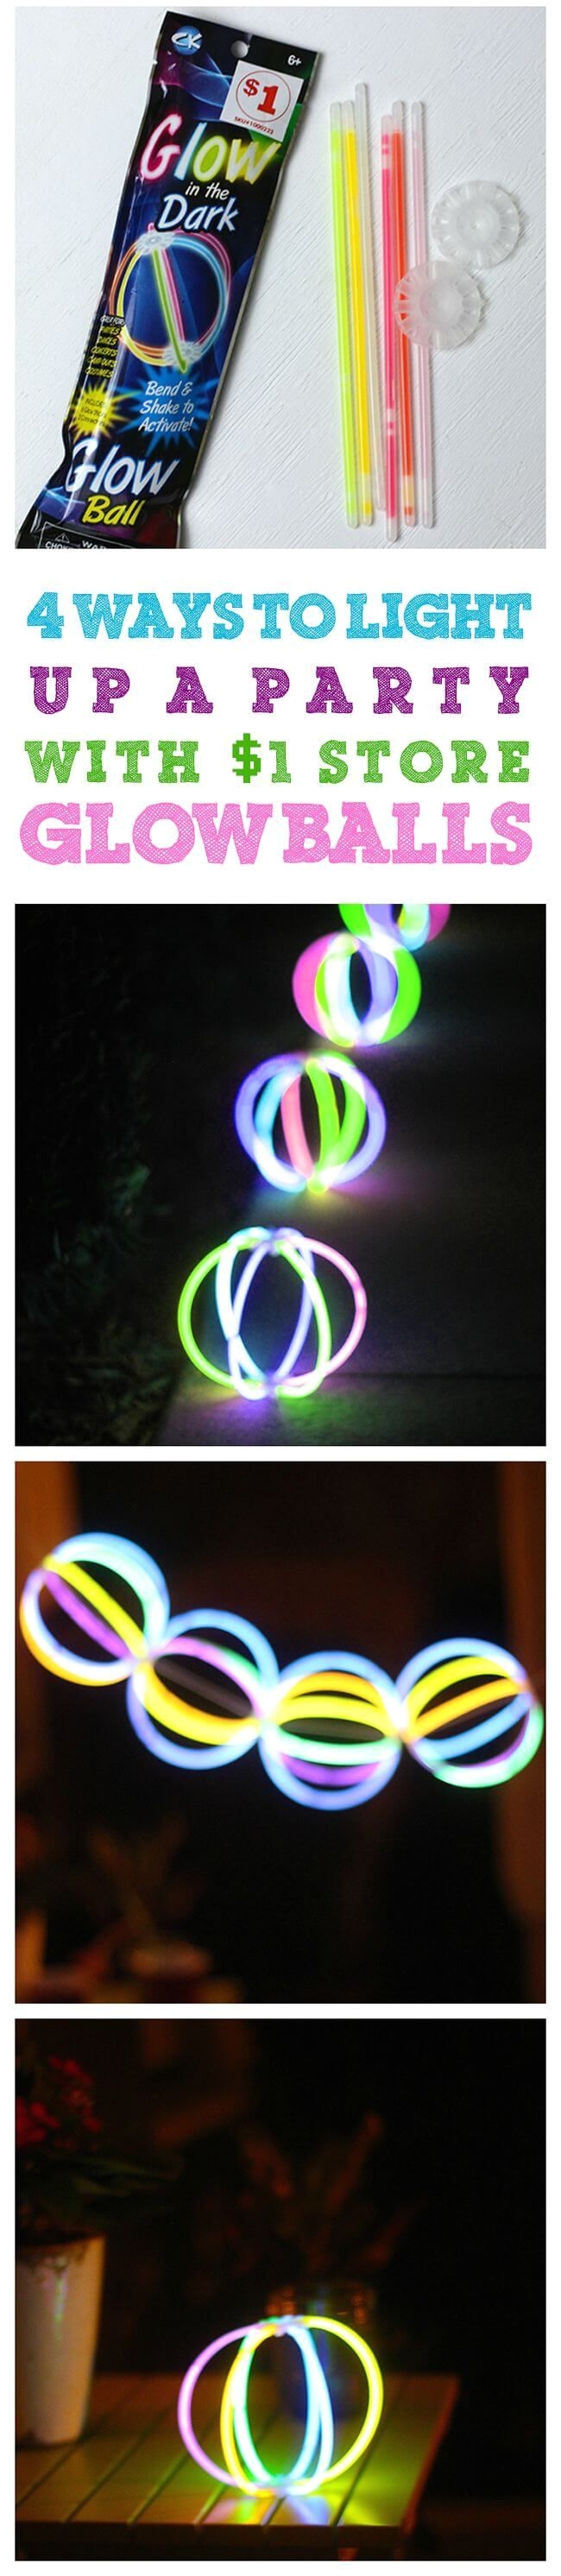 Glow In the Dark Party Decorations Ideas 32 Best Party Decor Ideas Images On Pinterest Neon Party